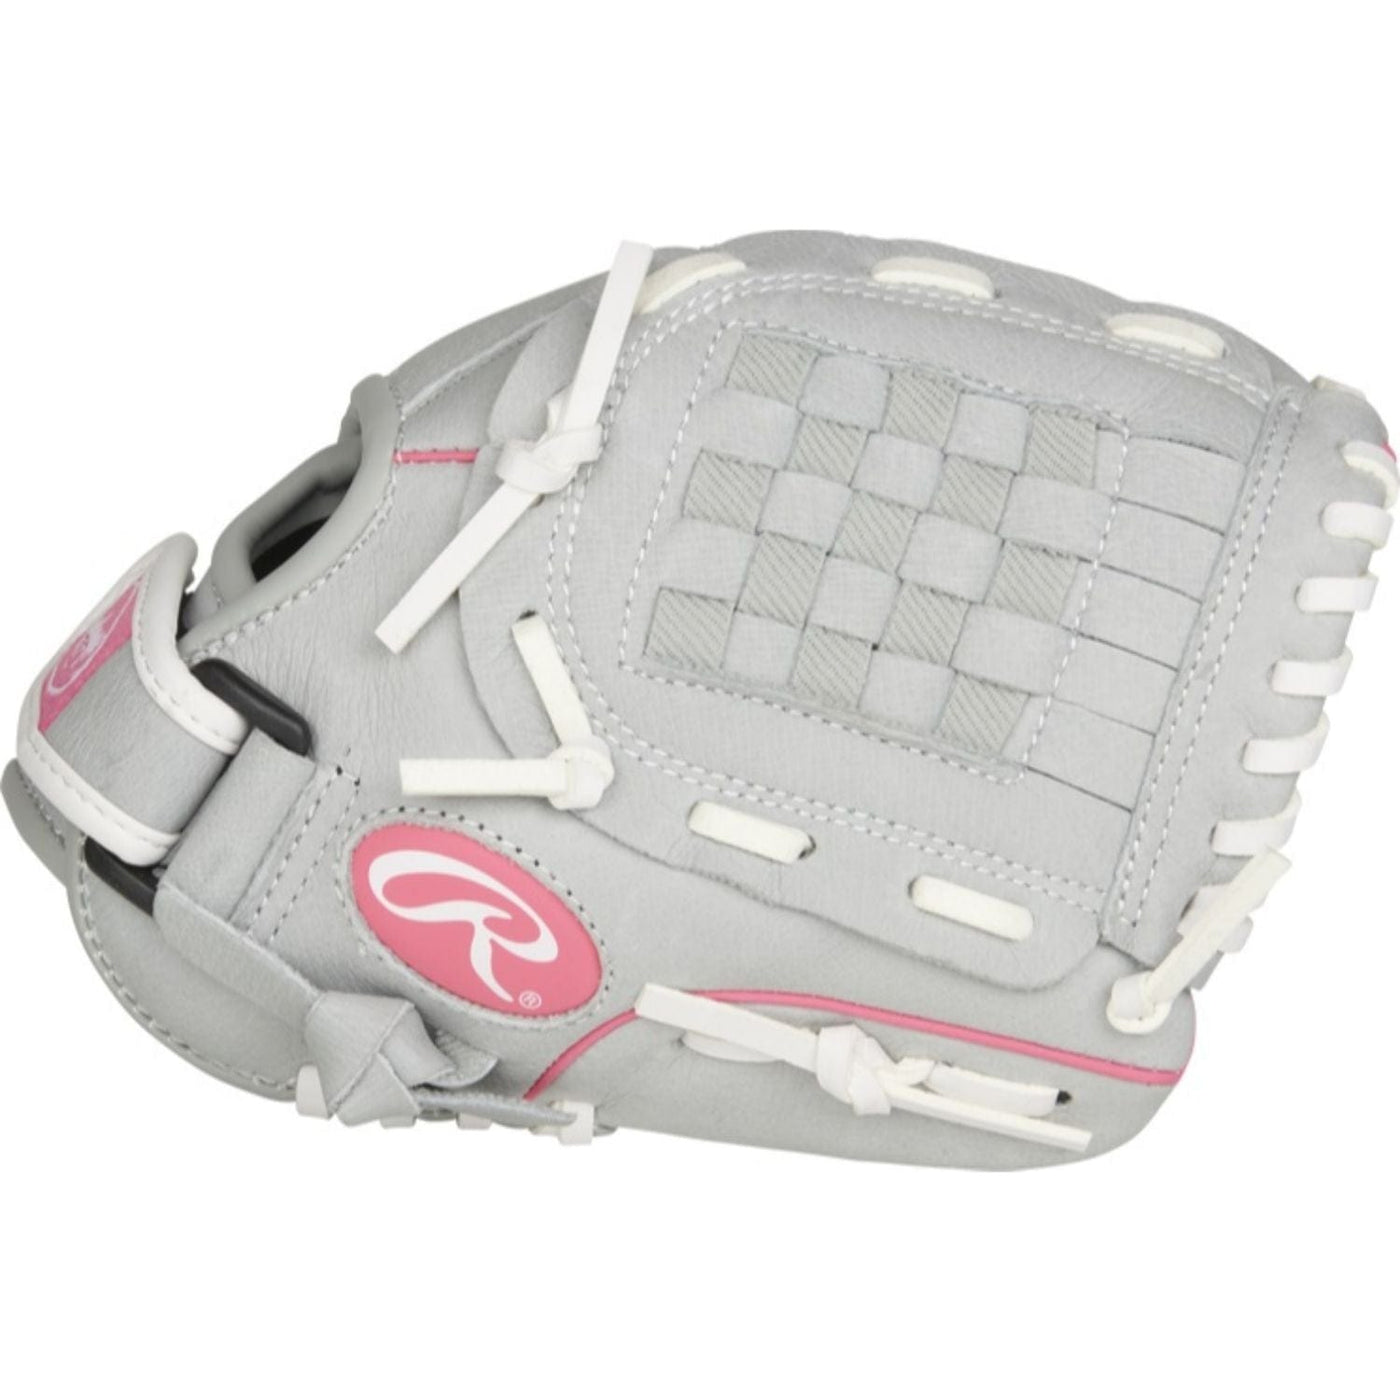 Rawlings Rawlings Sure Catch 10.5 In Youth Sofball Glove Left hand Sports